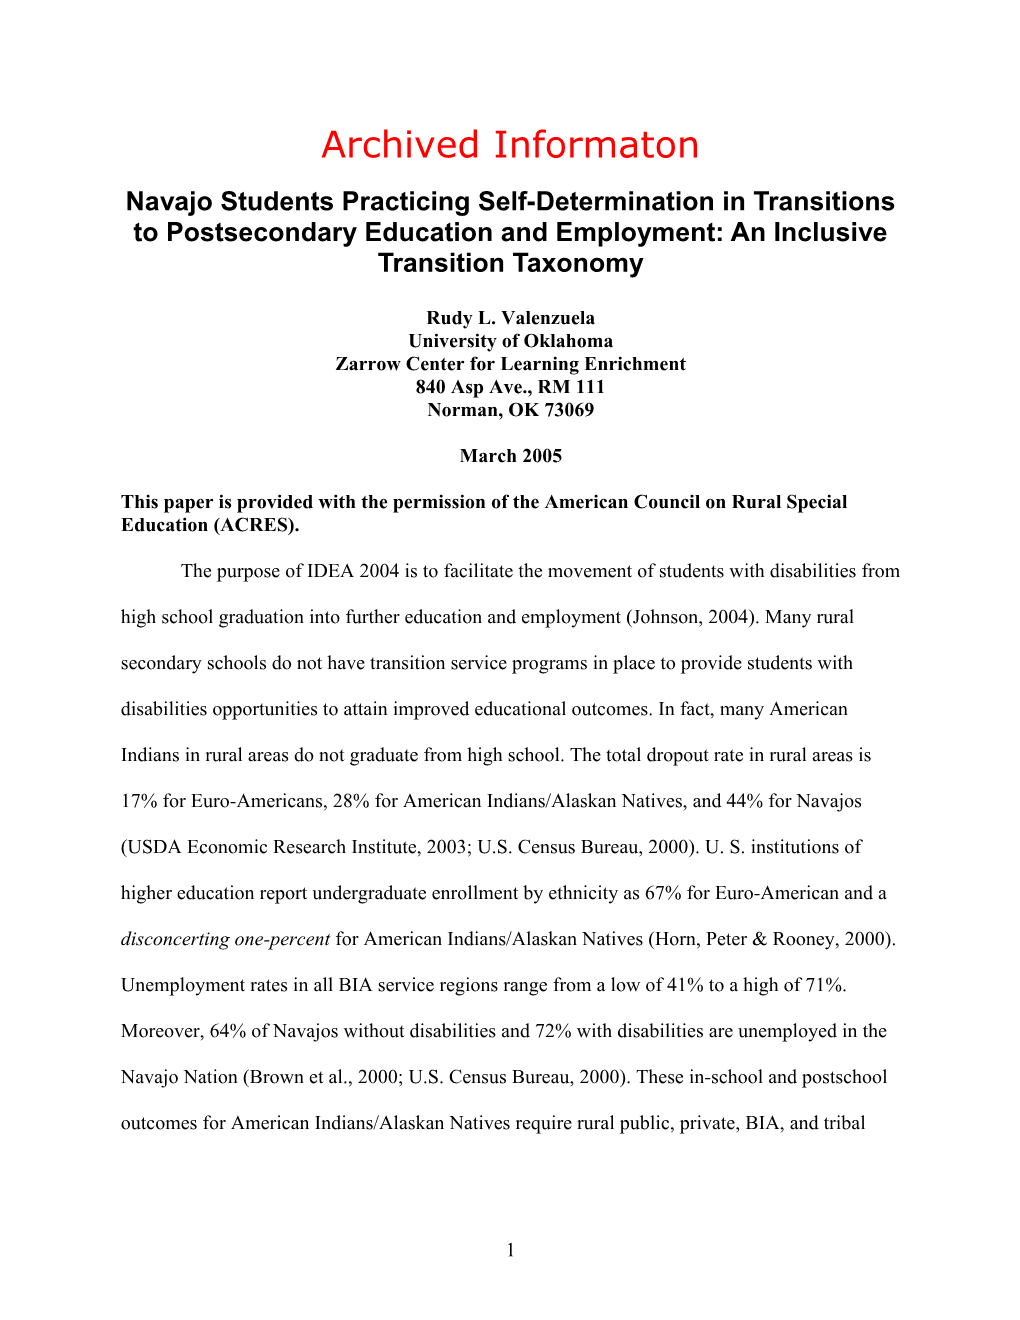 Archived: Navajo Students Practicing Self-Determination in Transitions to Postsecondary